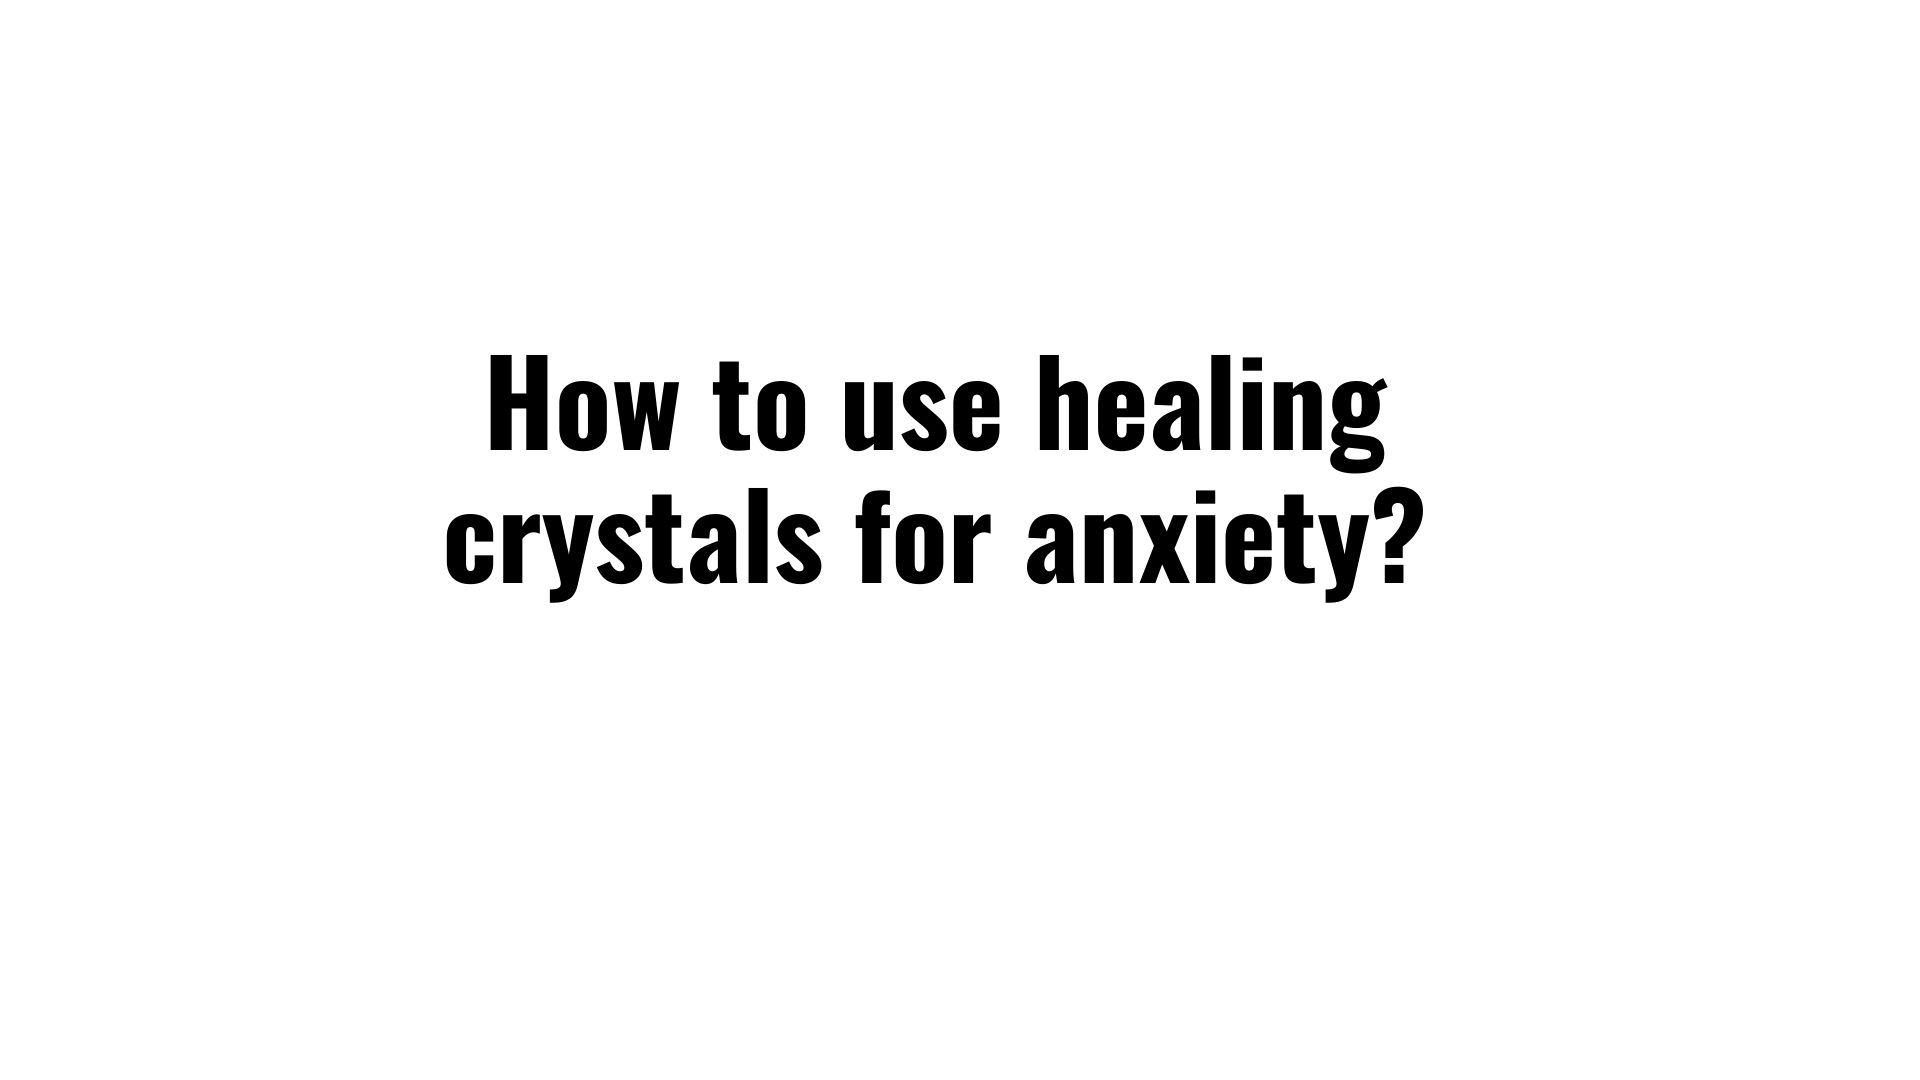 How to use healing crystals for anxiety